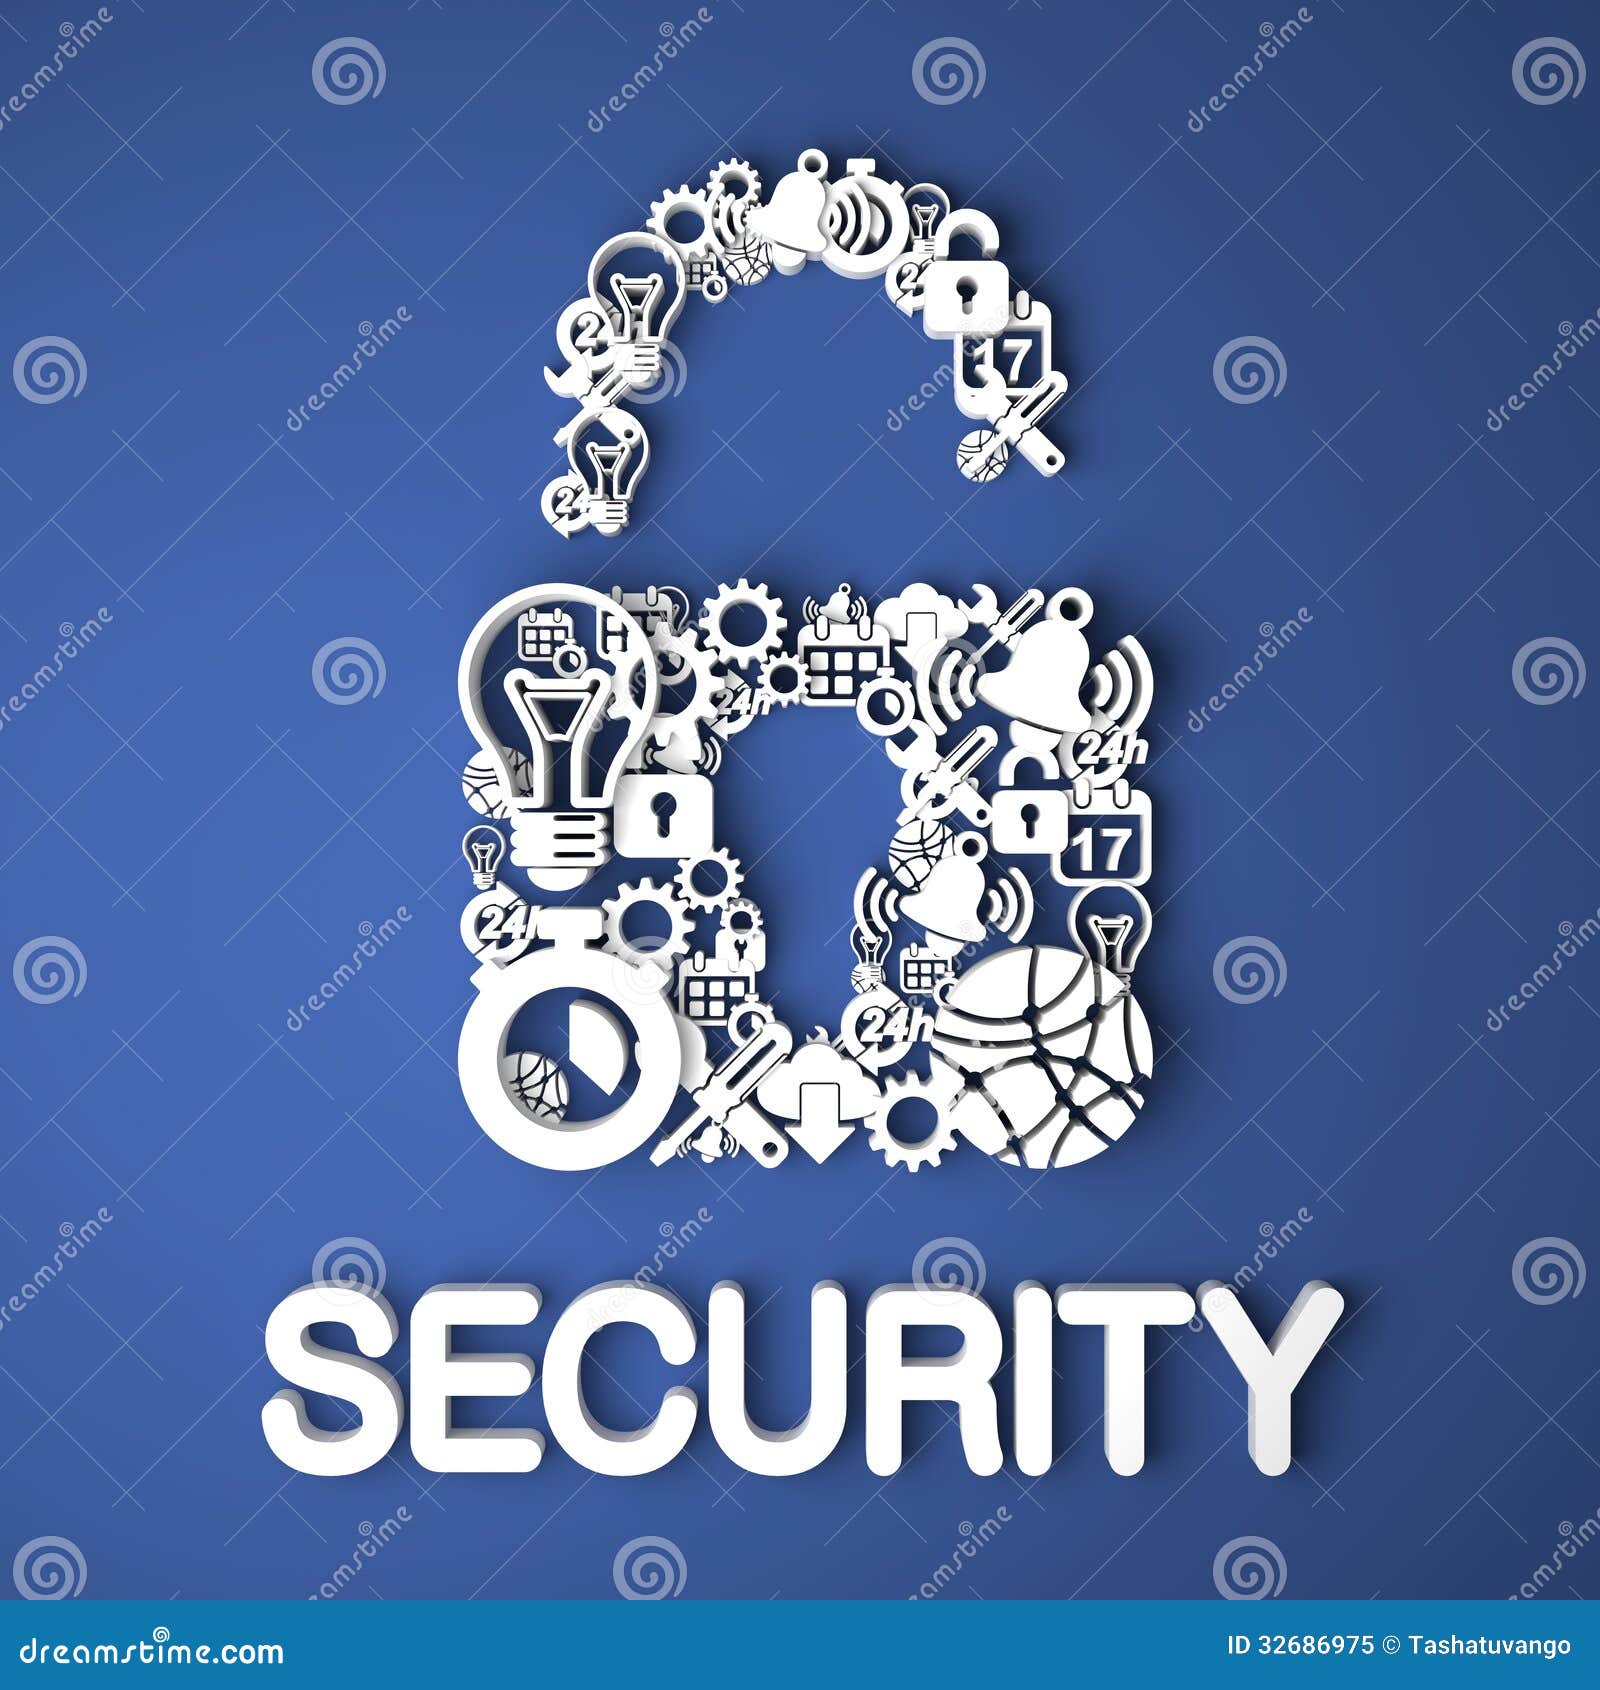 Web Security For Your Corporation 3